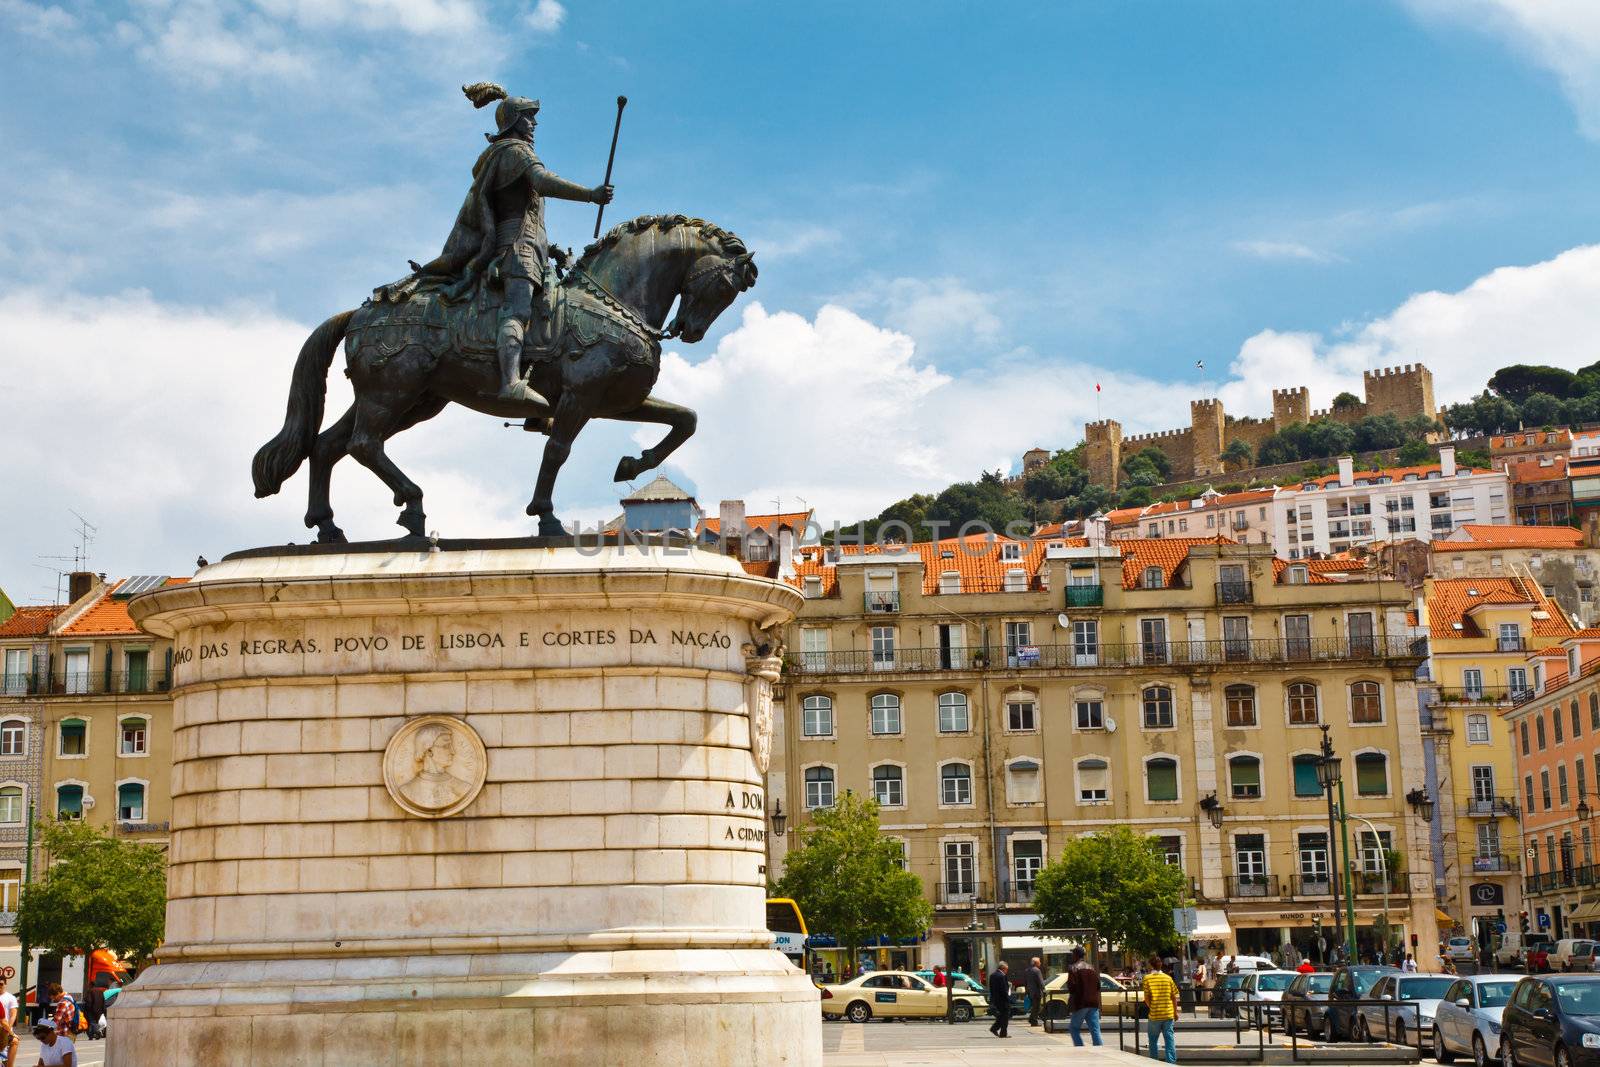 Statue of King on Central Square in Lisbon, Portugal